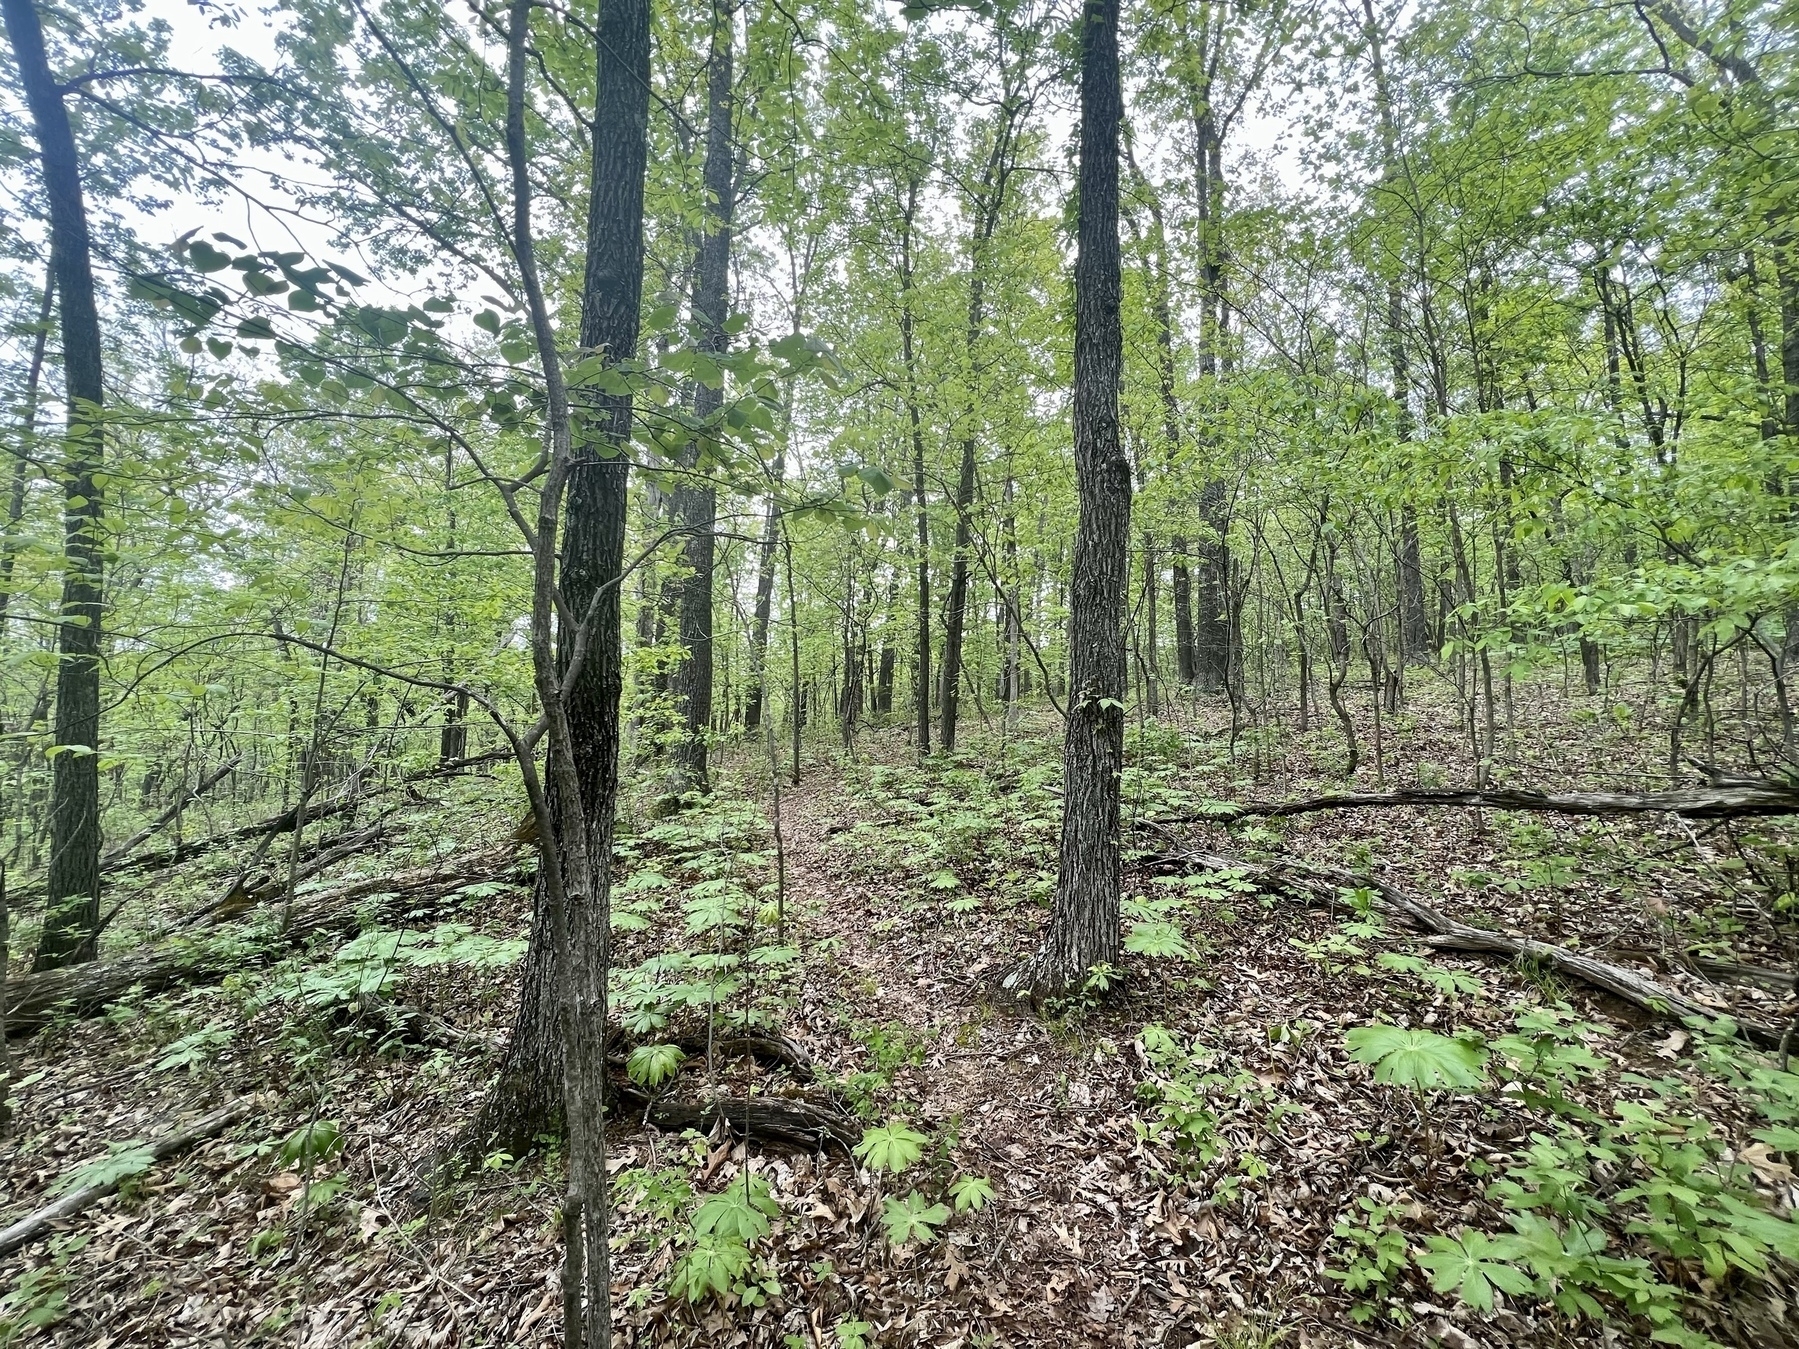 A woodland trail through a large patch of Mayapple plants which grow low to the ground and look like small umbrellas. The trail is on a steep hill that slants upward towards the right. 